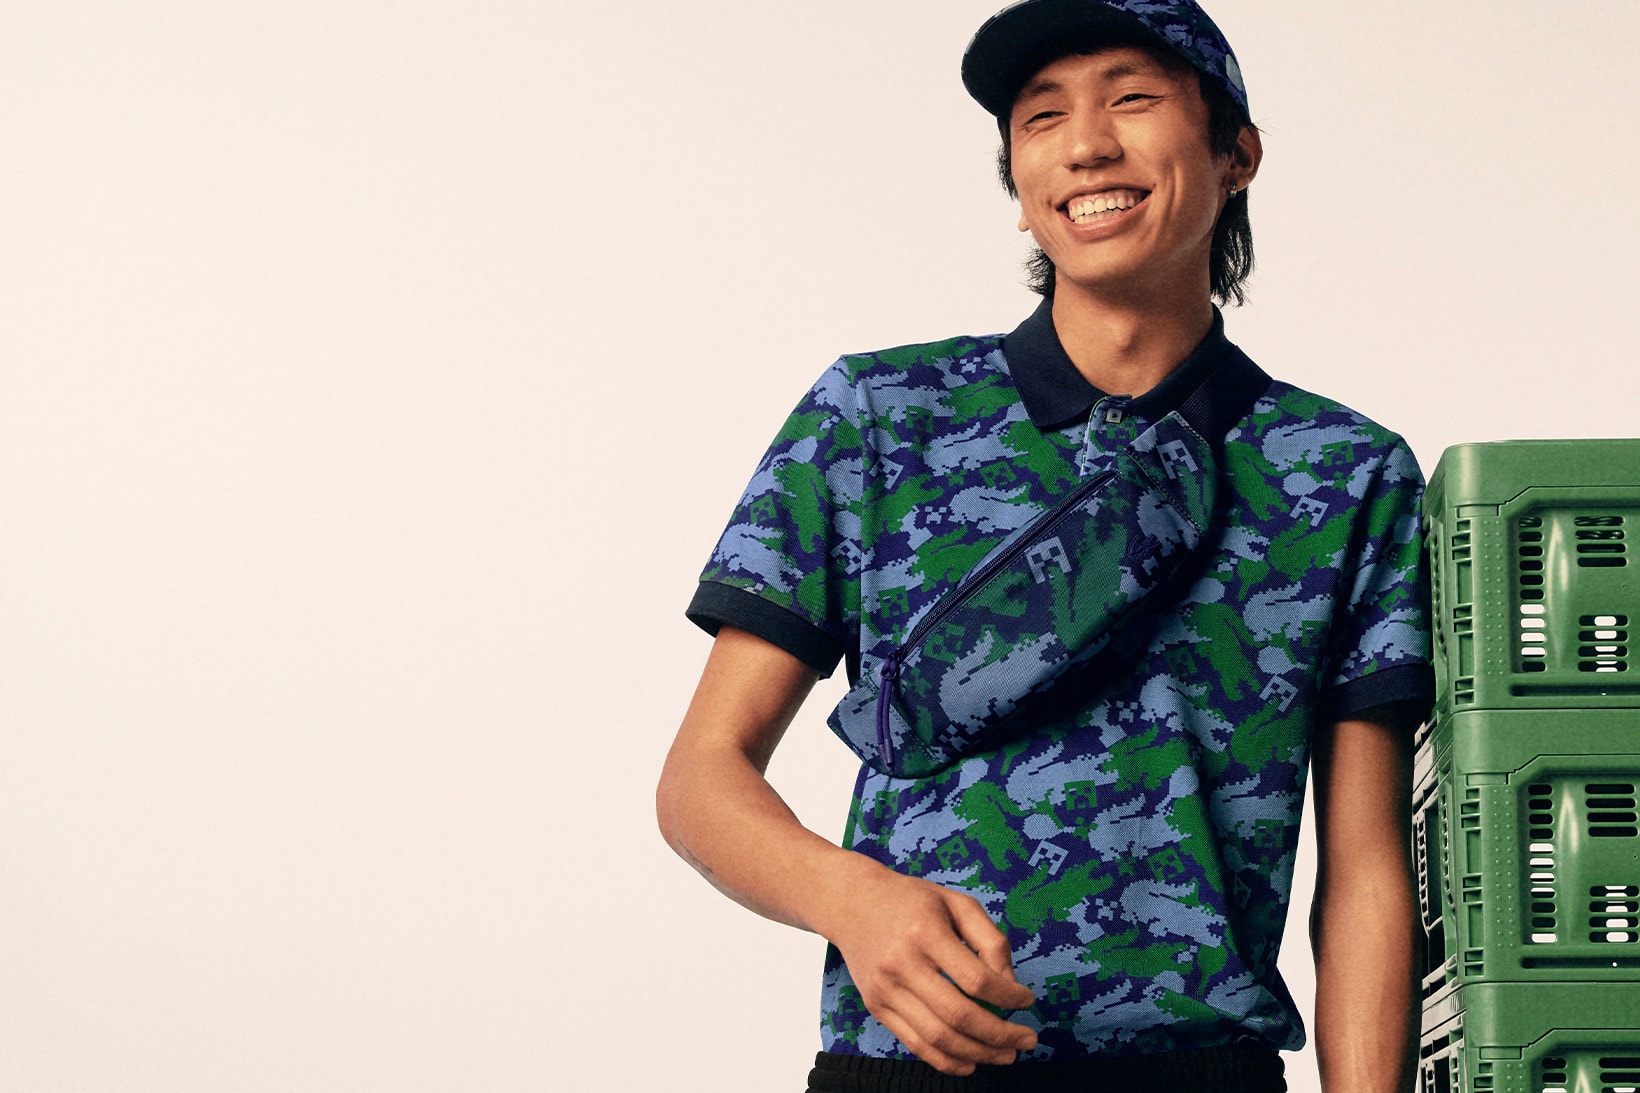 Lacoste and Minecraft unveil collaborative apparel collection